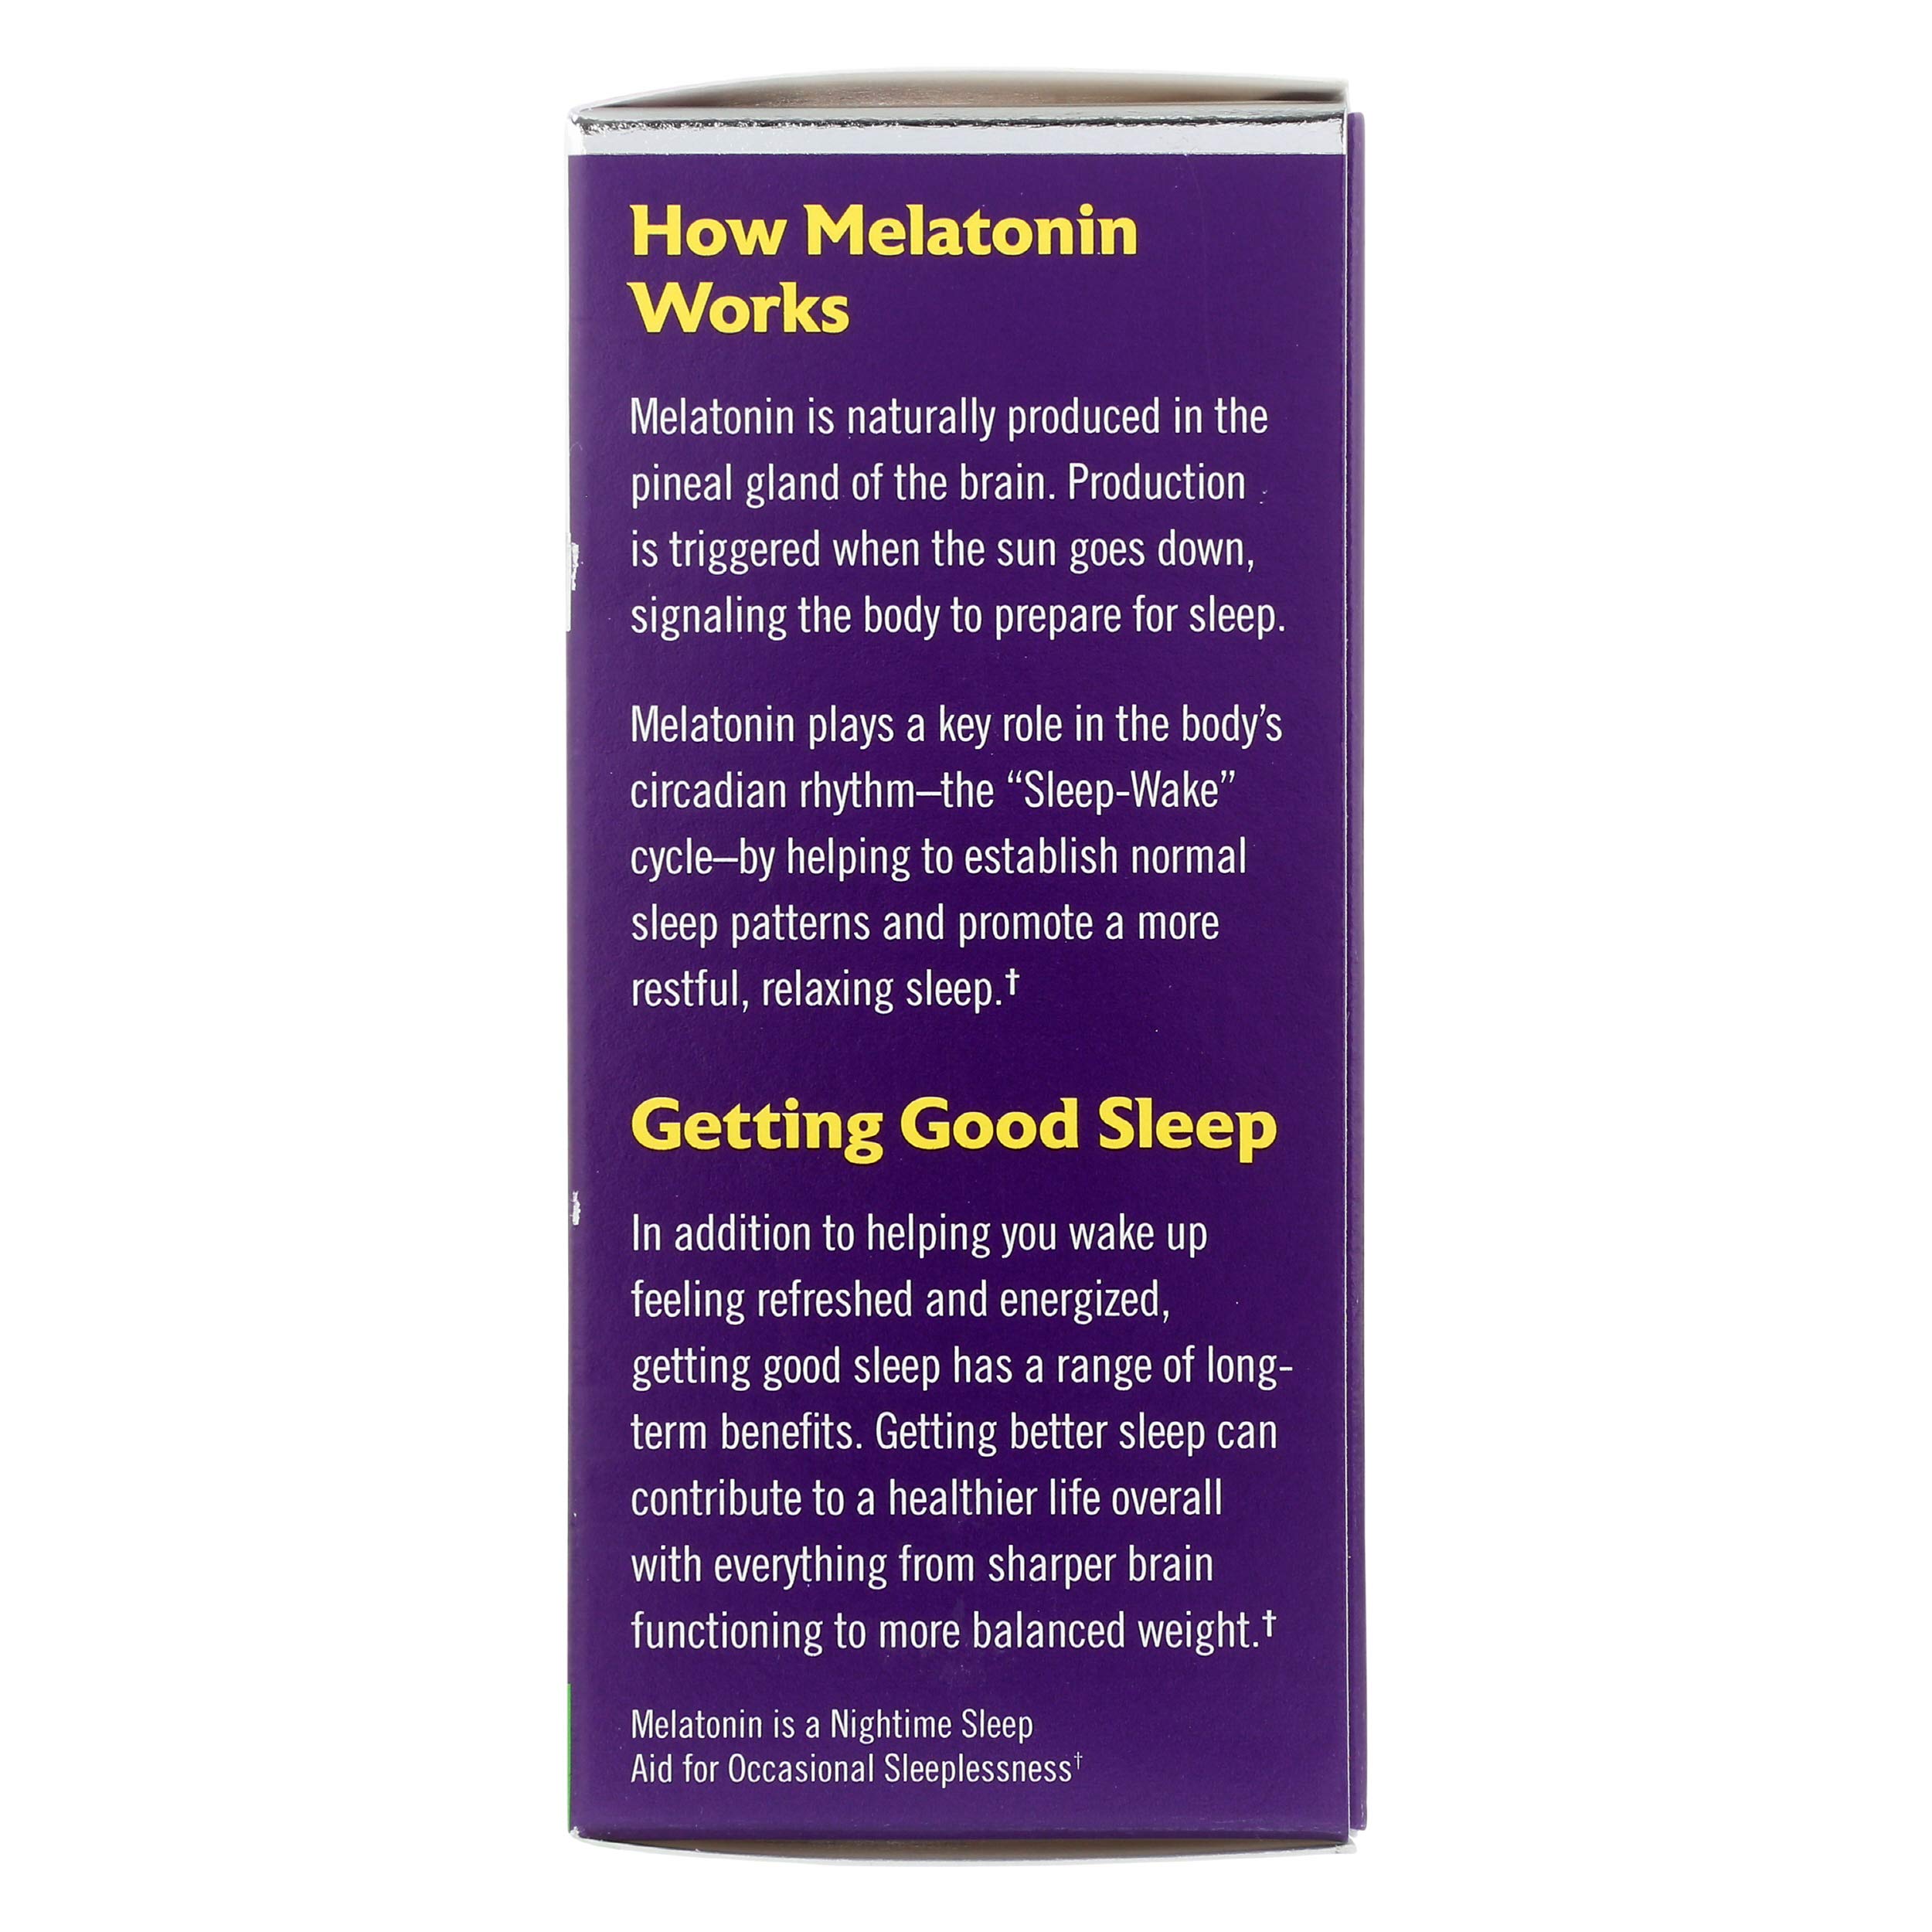 Natrol Melatonin Advanced Sleep Tablets with Vitamin B6, Helps You Fall Asleep Faster, Stay Asleep Longer, 2-Layer Controlled Release, 100% Drug-Free, 10mg, 60 Count